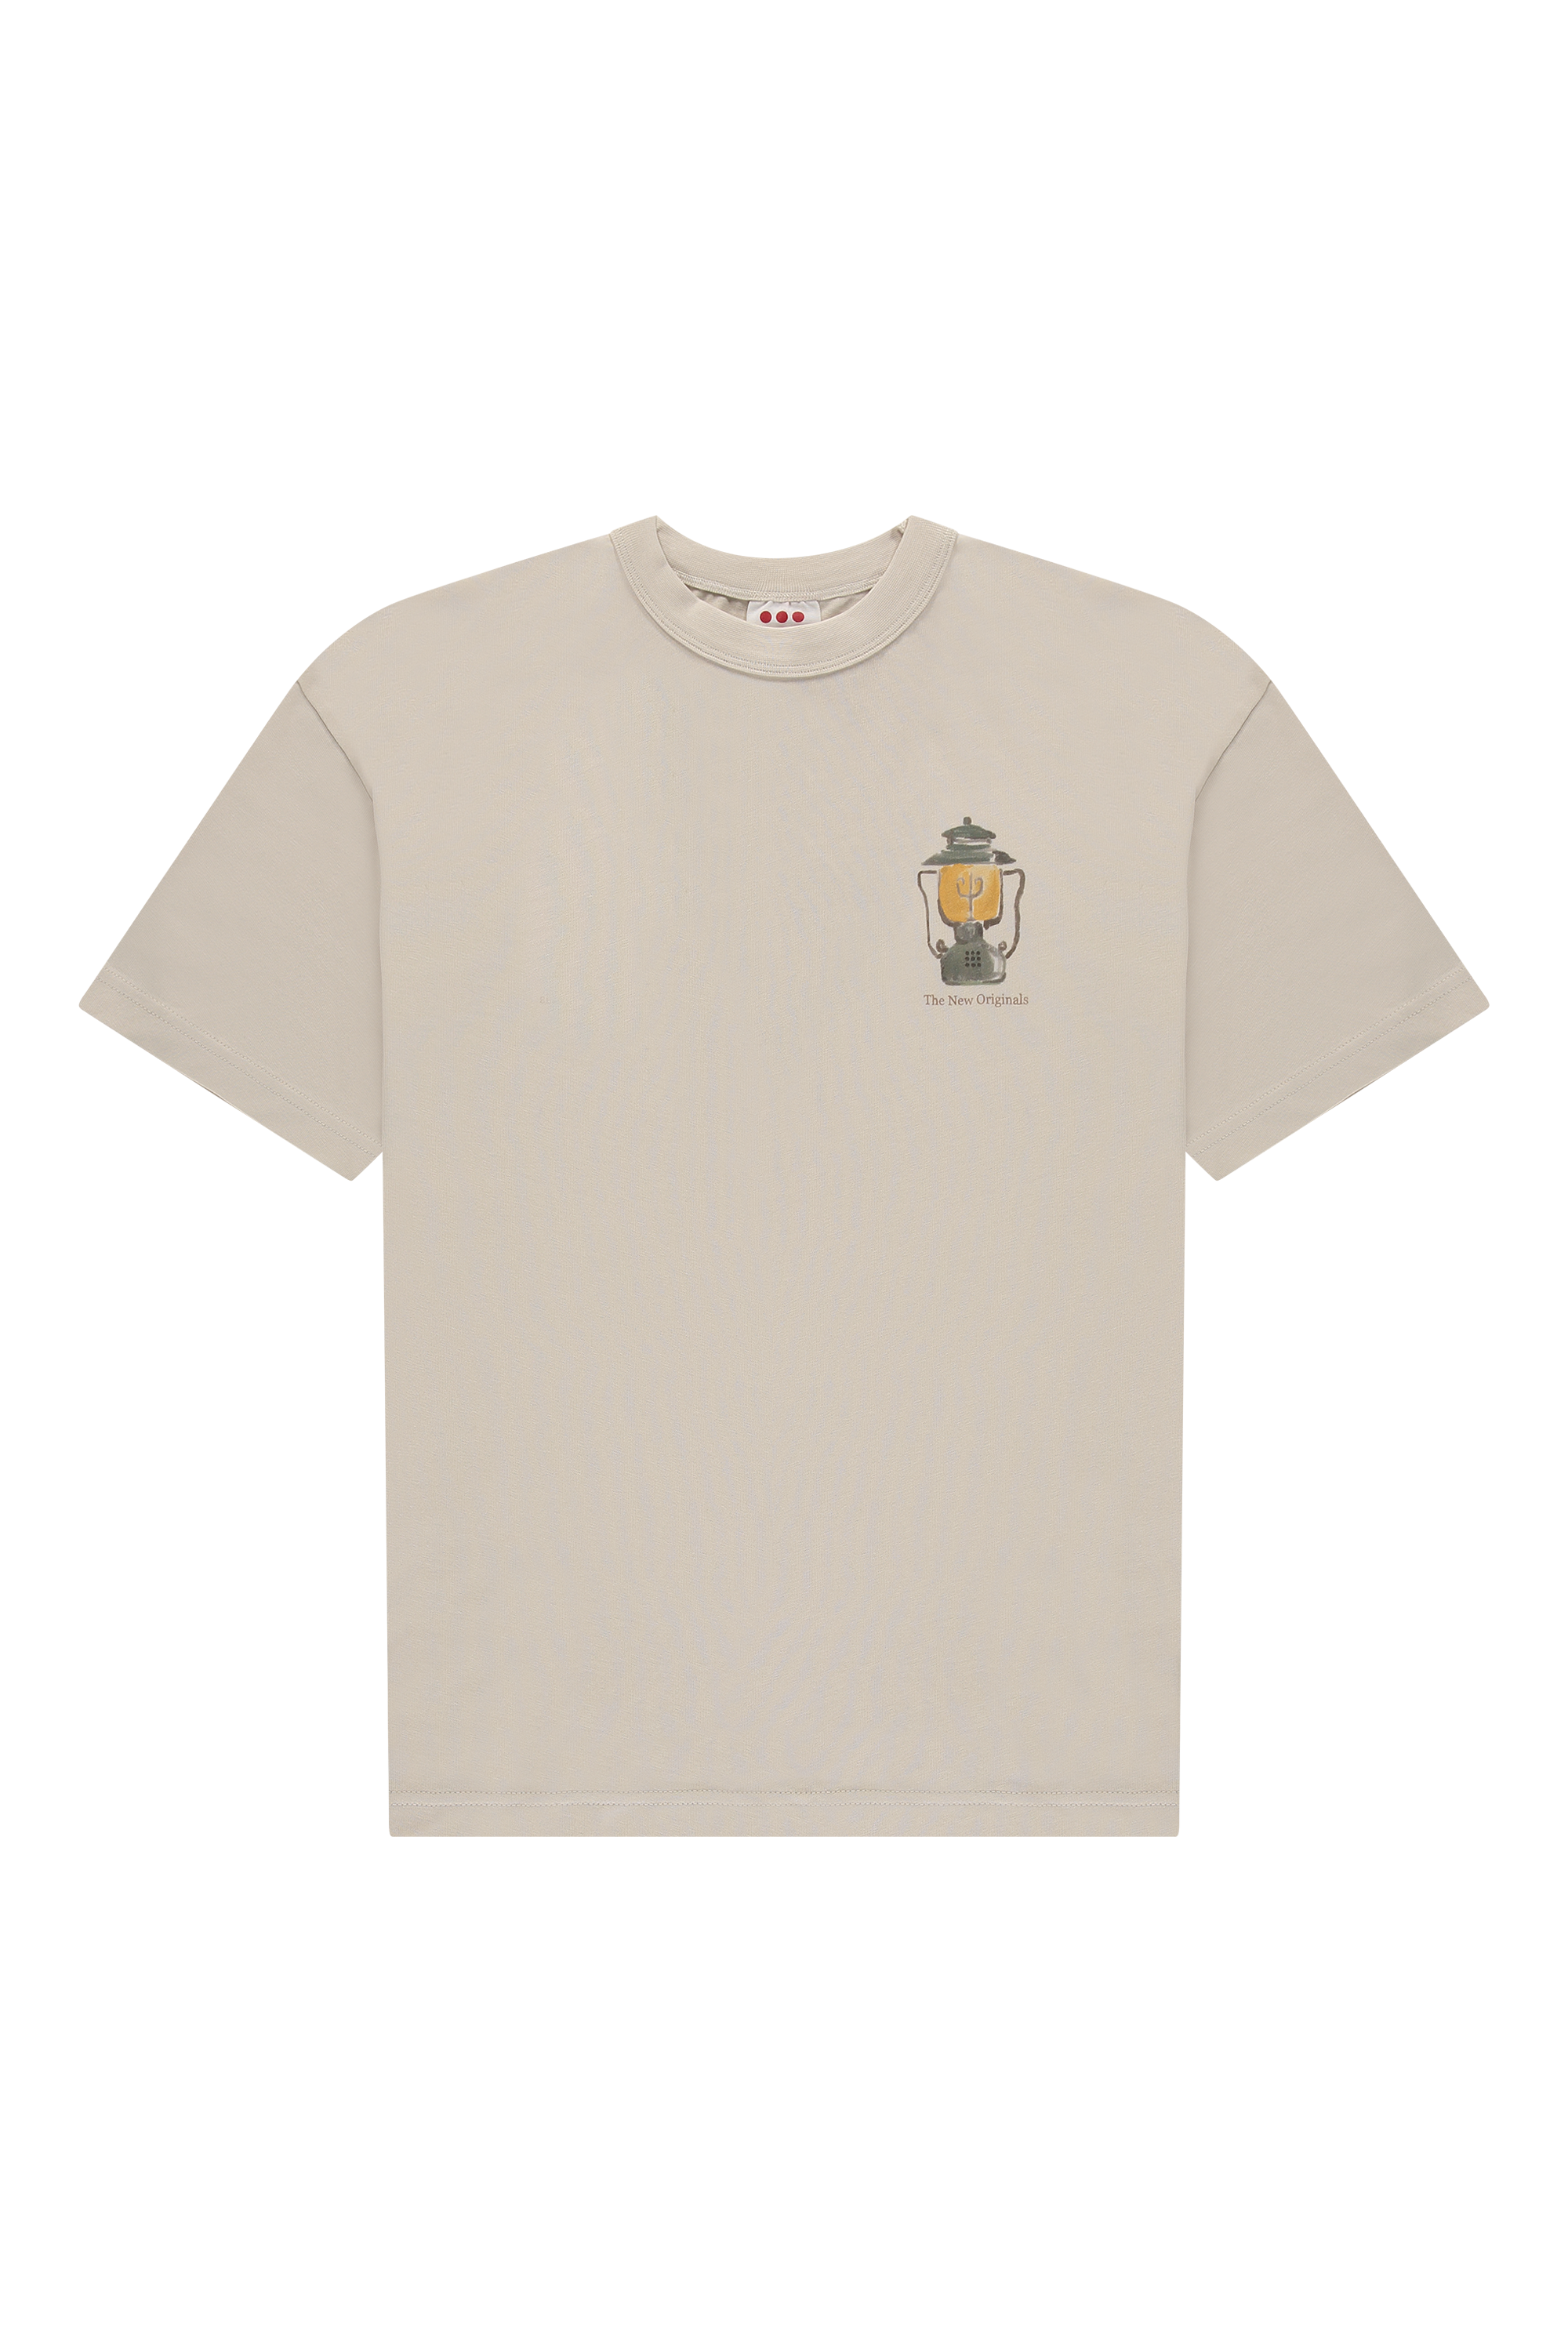 Camping Essentials Tee White Sand